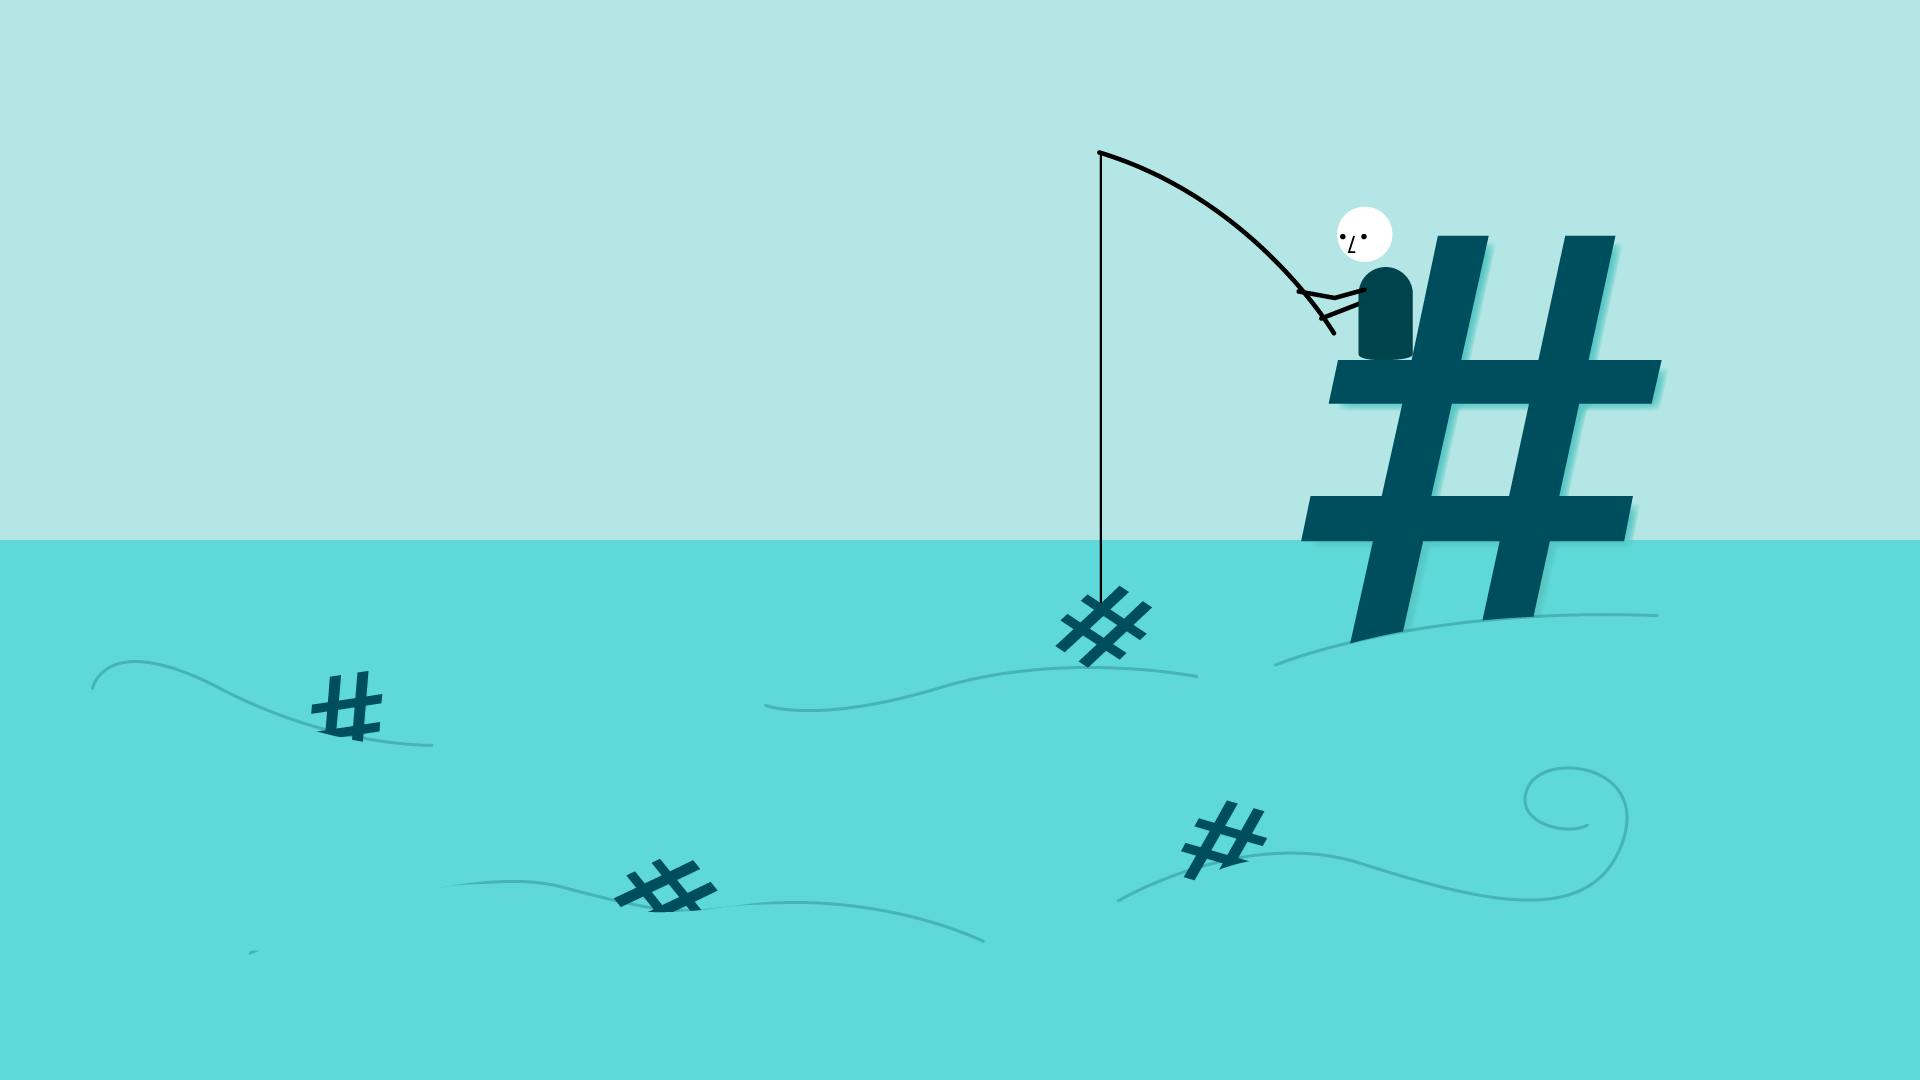 Graphic showing a man fishing for hashtags.